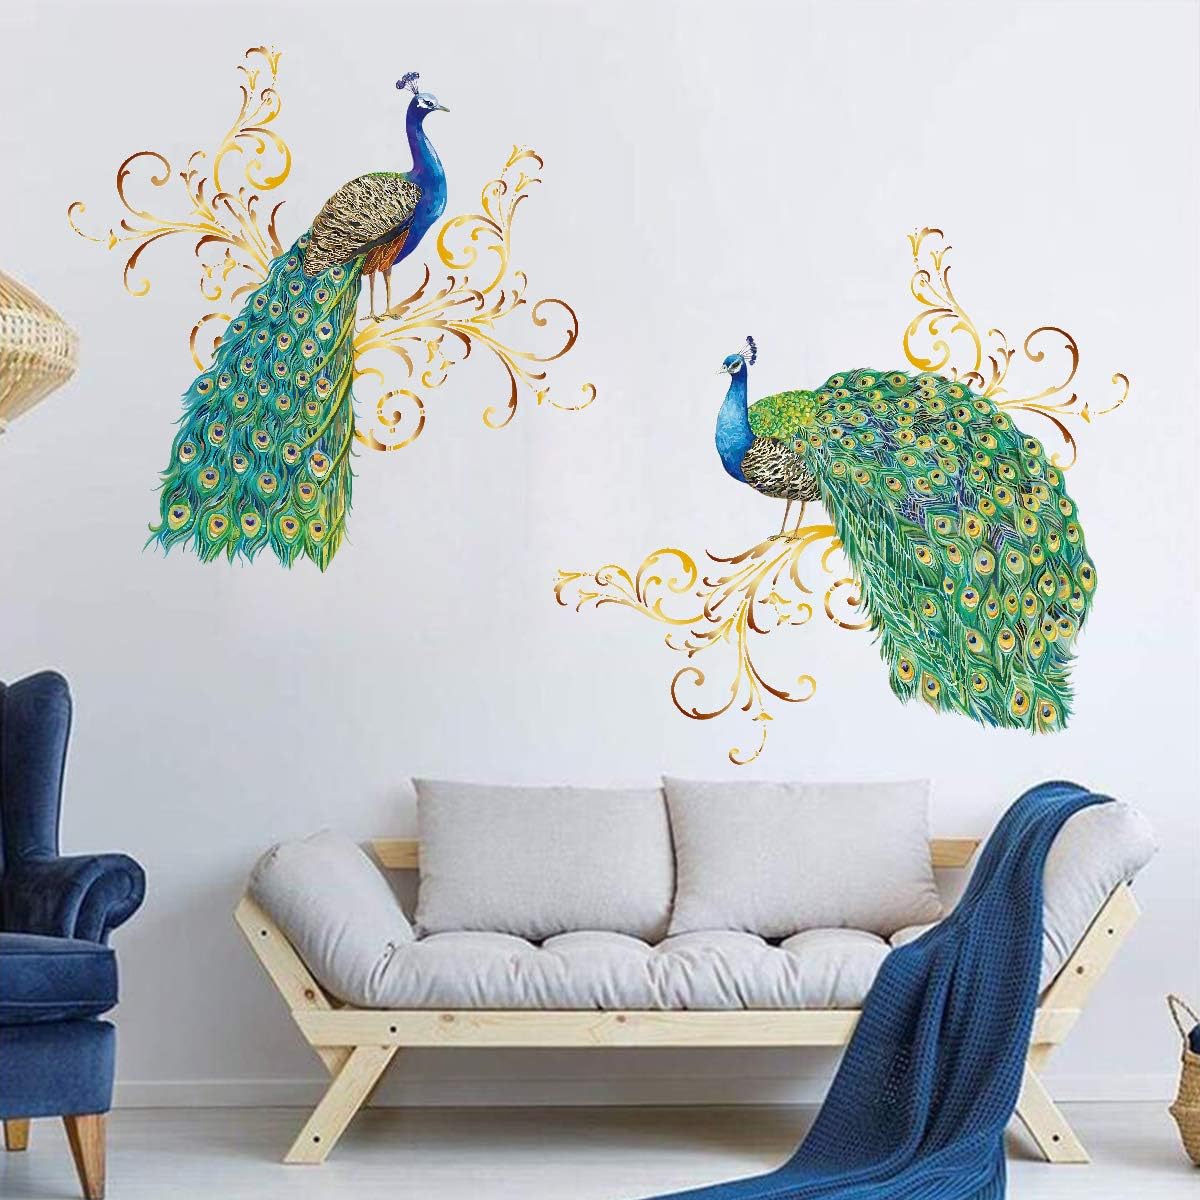 11 Incredible Wall Stickers For Living Room For 2023